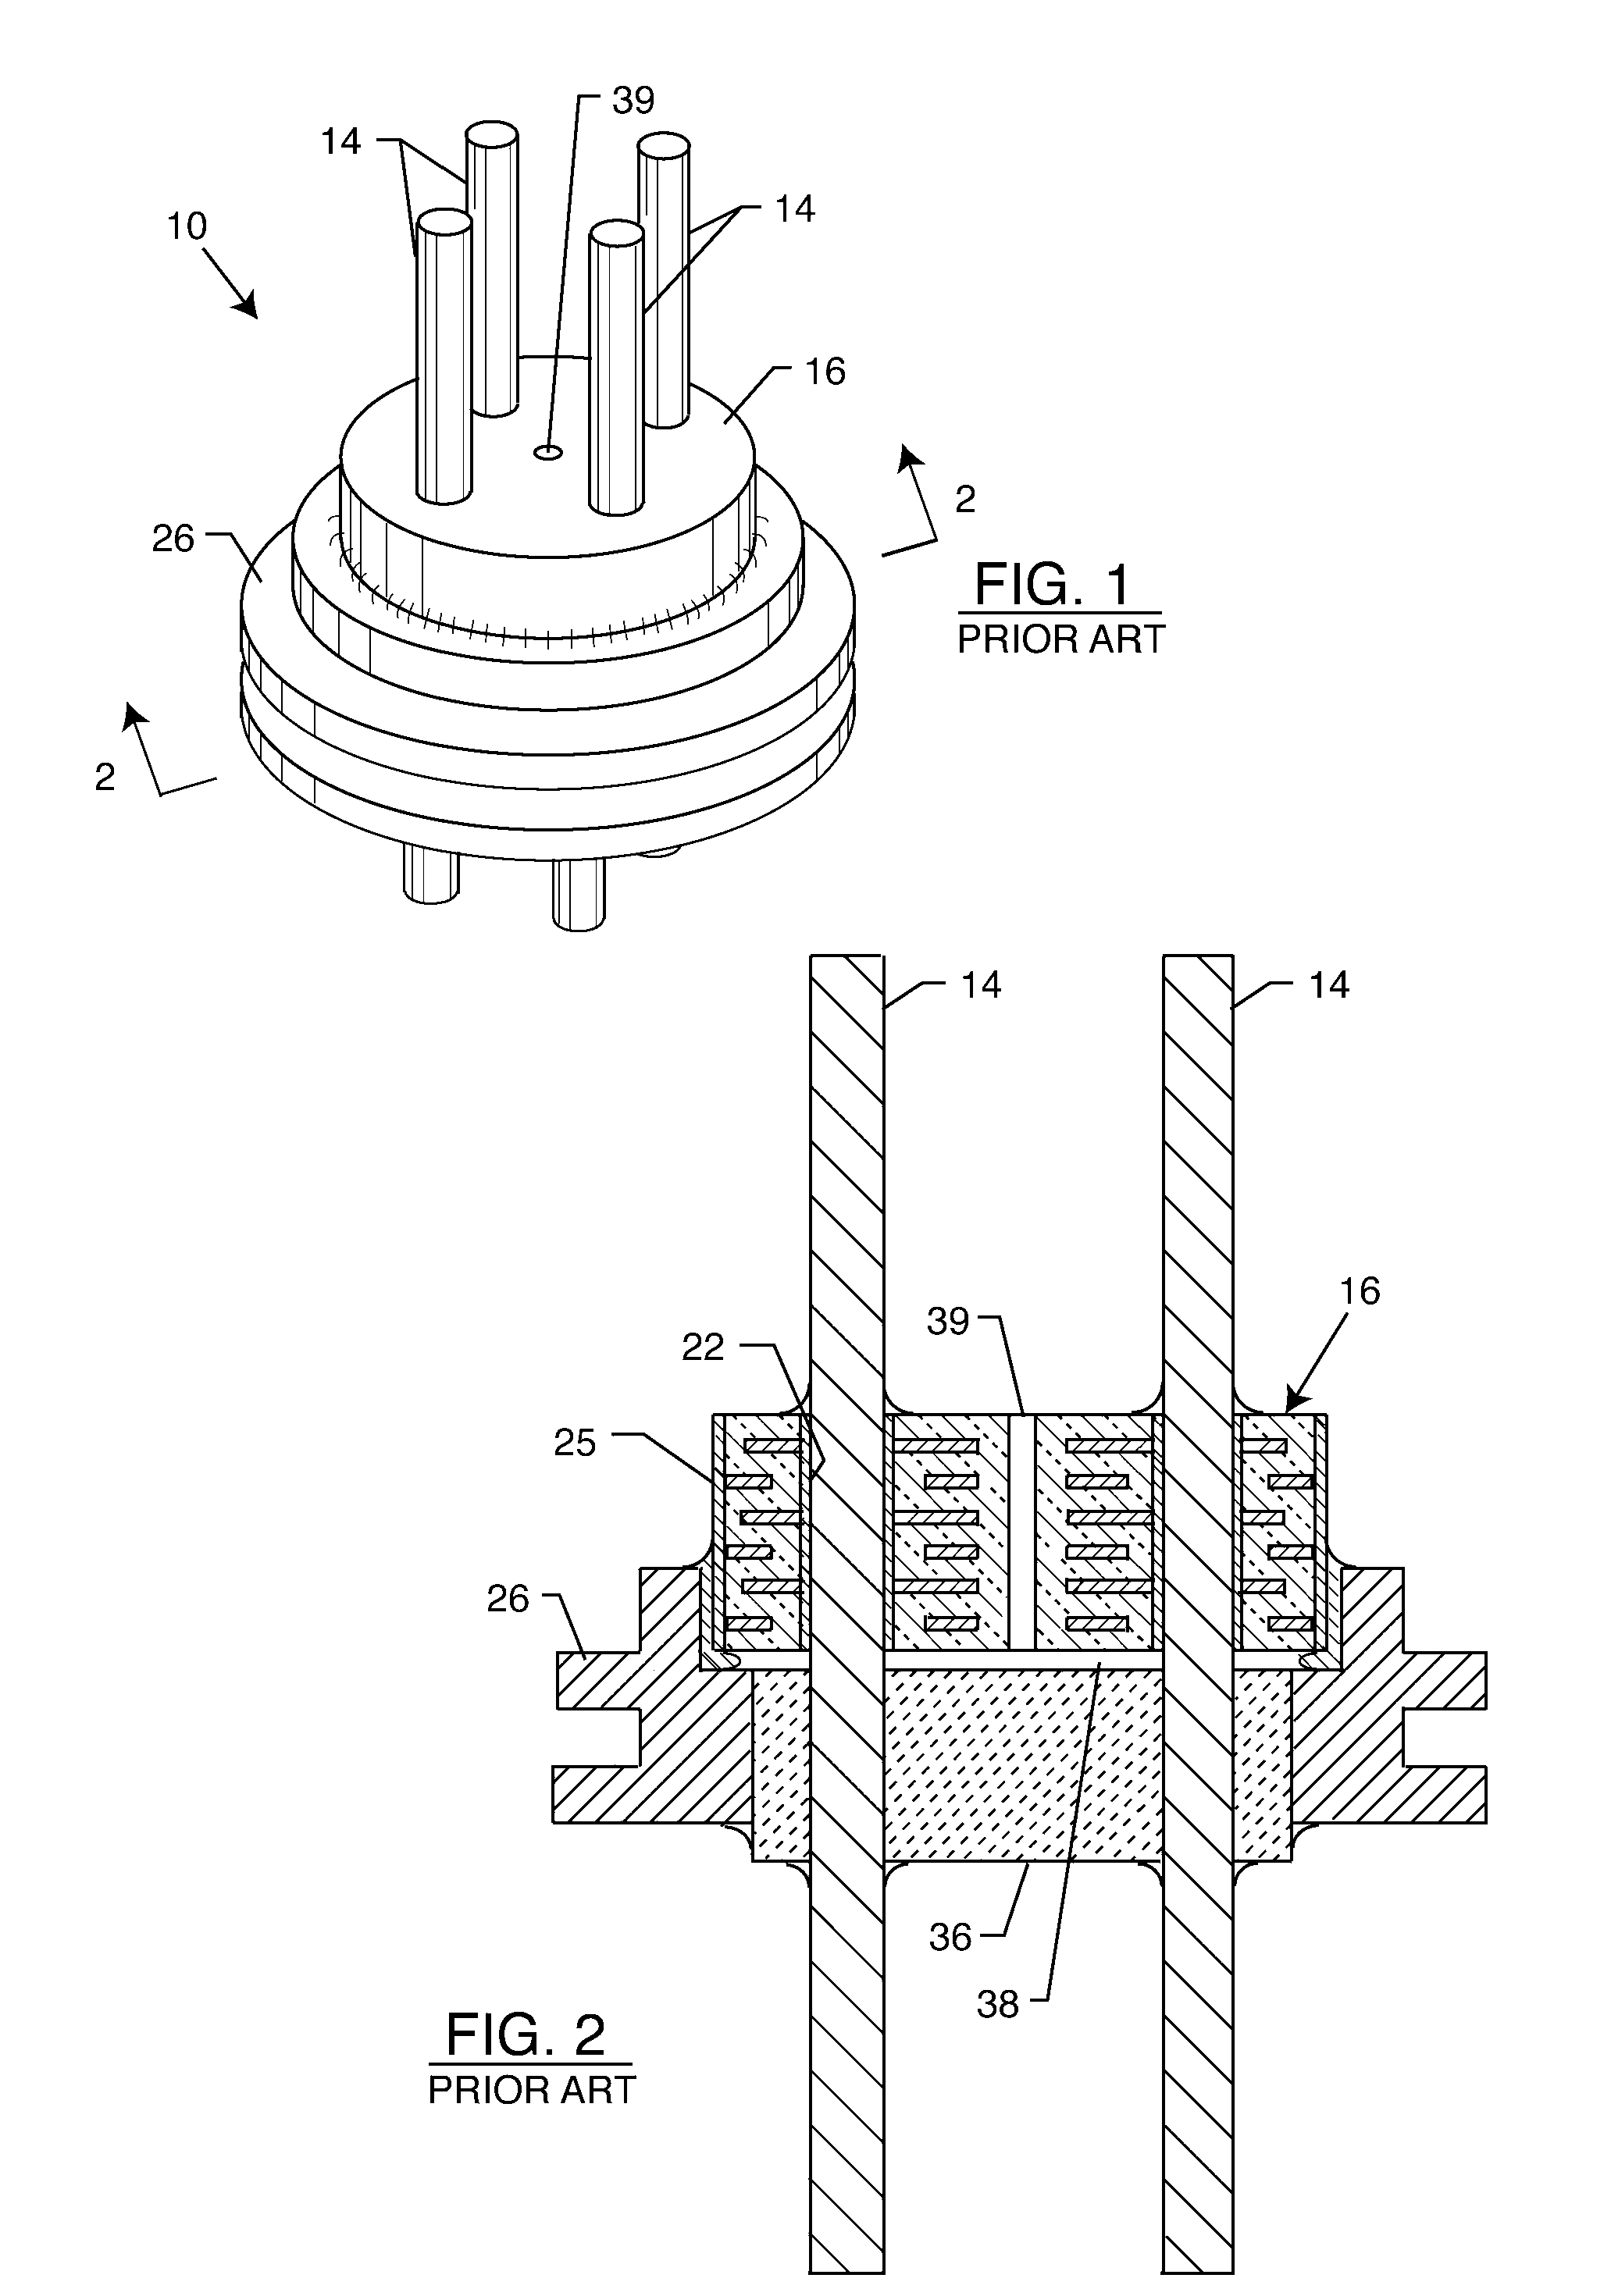 Feedthrough capacitor filter assemblies with laminar flow delaminations for helium leak detection